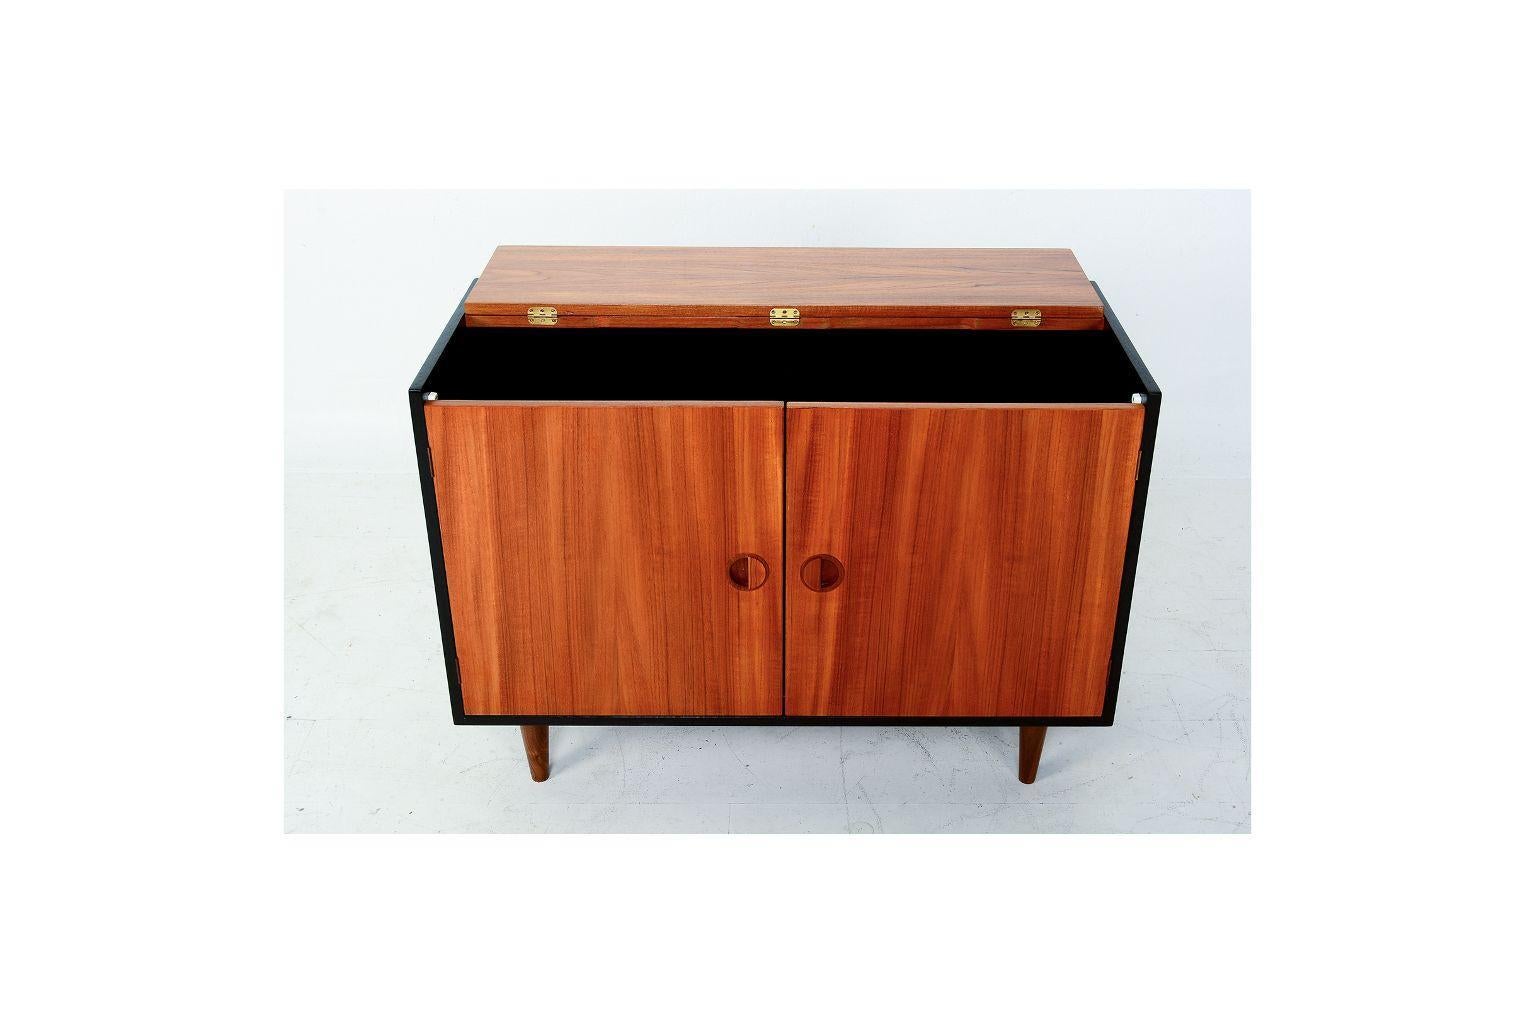 For your consideration: Small teak wood cabinet/credenza Scandinavian Modern 1960s. In the manner of Nils Jonsson.

Features clever flip top opening and two easy access front doors. Adjustable shelves. Mounted on peg legs.

Dimensions: H 23 in.